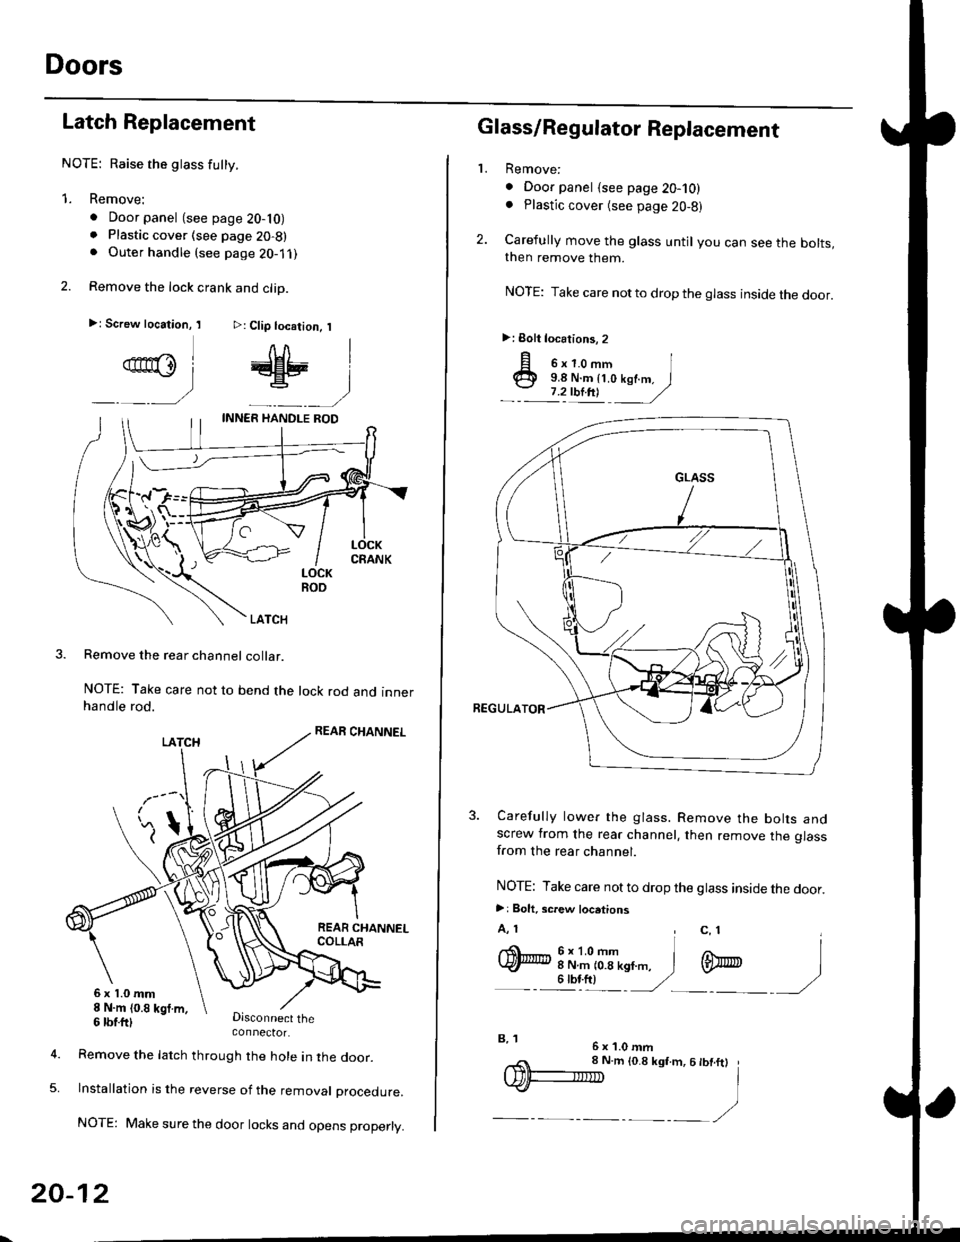 HONDA CIVIC 1999 6.G Workshop Manual Doors
Latch Replacement
NOTE: Raise the glass futty.
1. Remove:
. Door panel (see page 20-10). Plastic cover (see page 20-8). Outer handle (see page 2O-1 ,l
2. Remove the lock crank and clip.
>: Screw